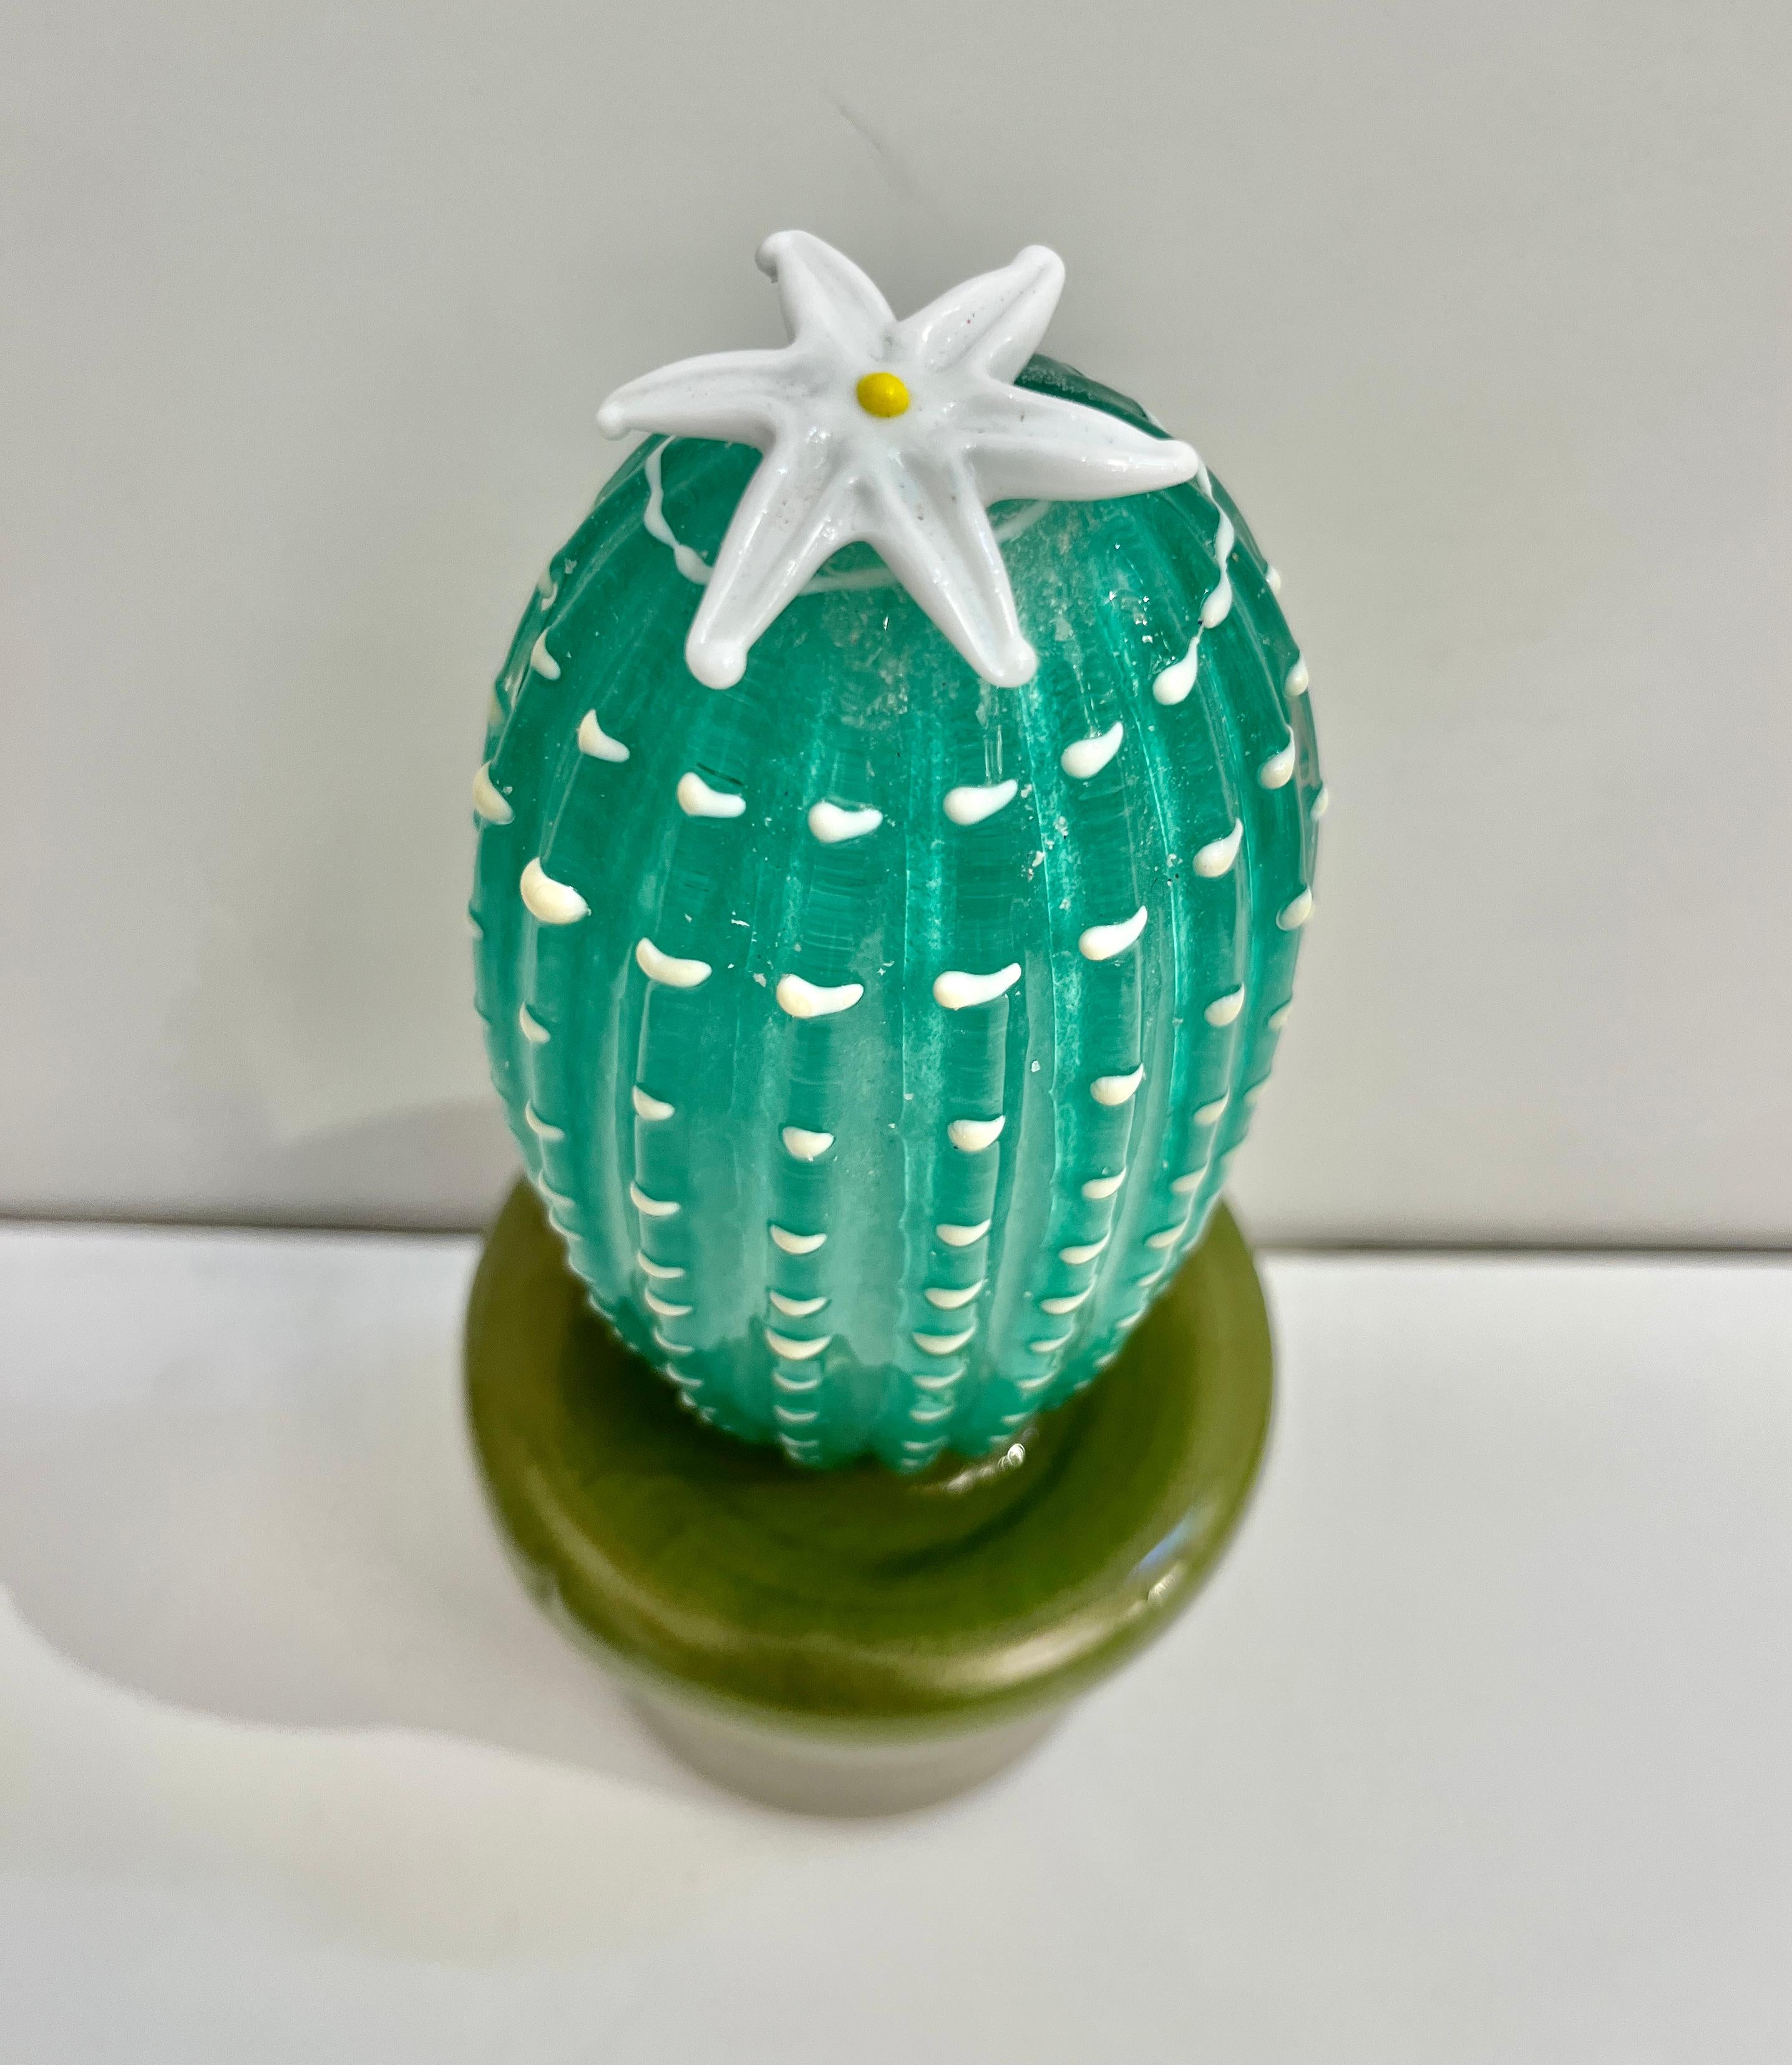 Contemporary Italian highly collectible potted glass cactus of limited edition, entirely handcrafted in Murano, with modern Minimalist design blown by Fornace Mian, in a lifelike organic modernist shape in overlaid aqua green Murano glass